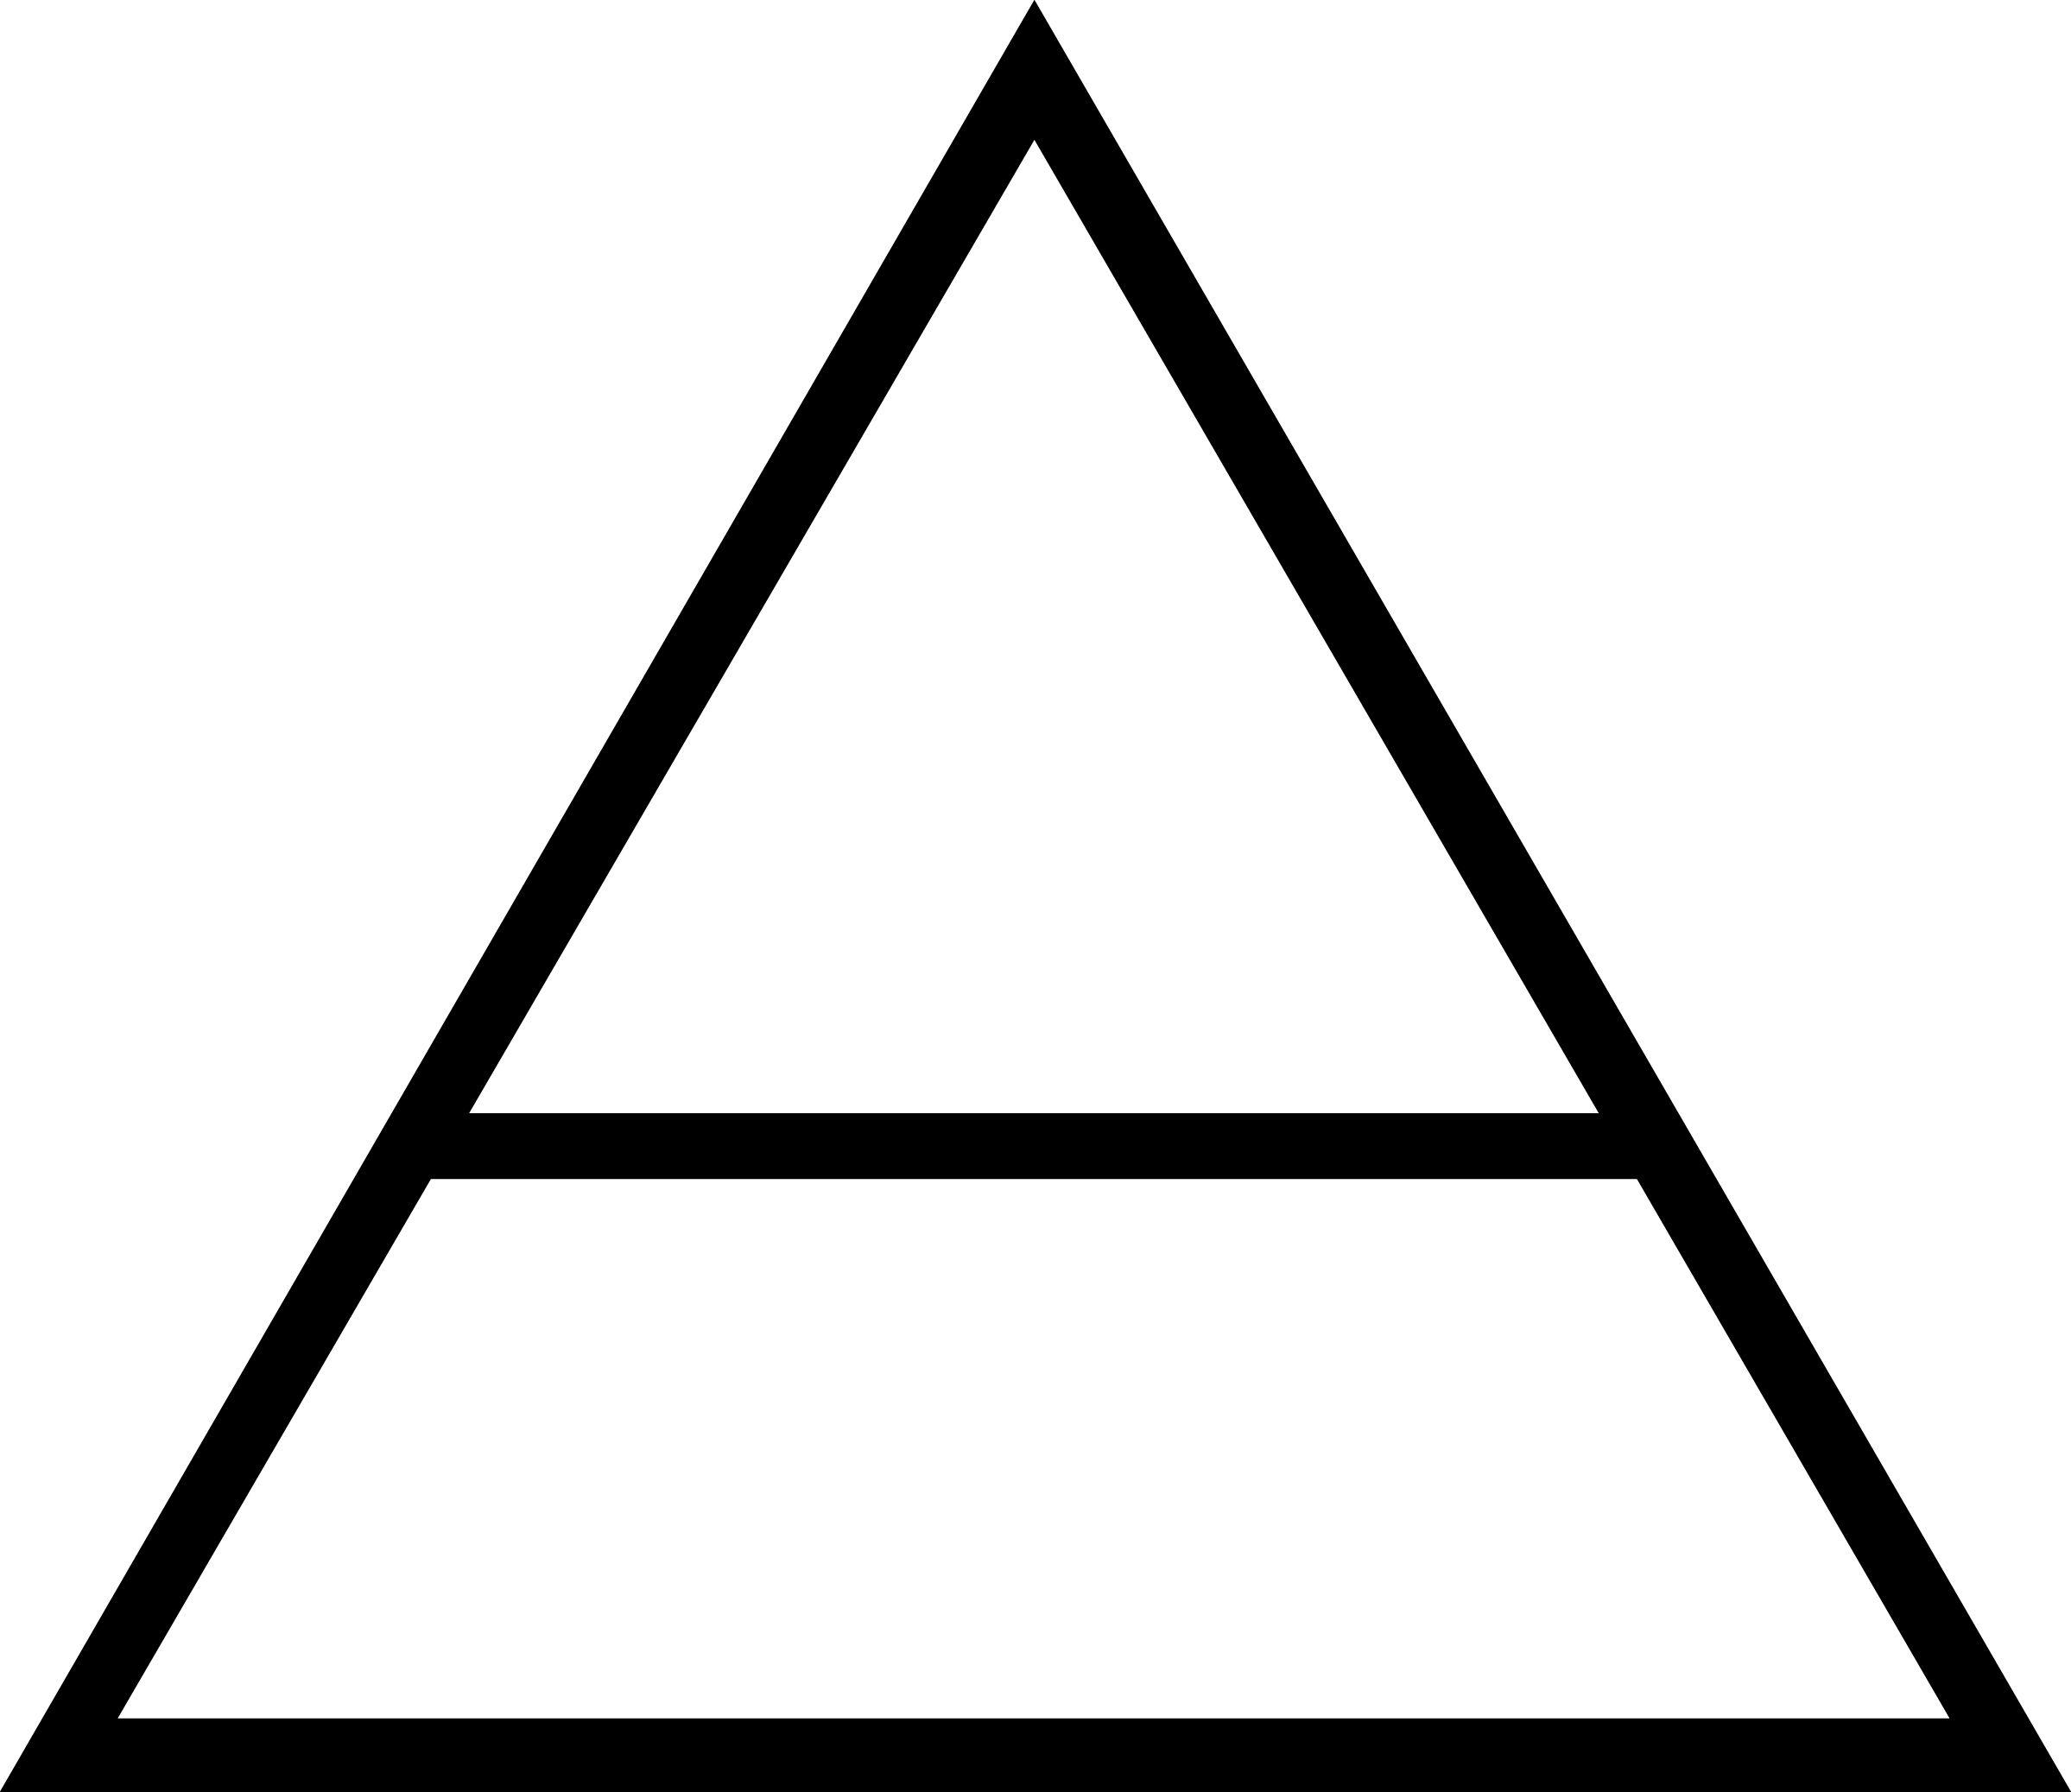 30 Seconds to Mars Logo - 30 Seconds To Mars triad #reference #design | Jared | Mars, 30 ...